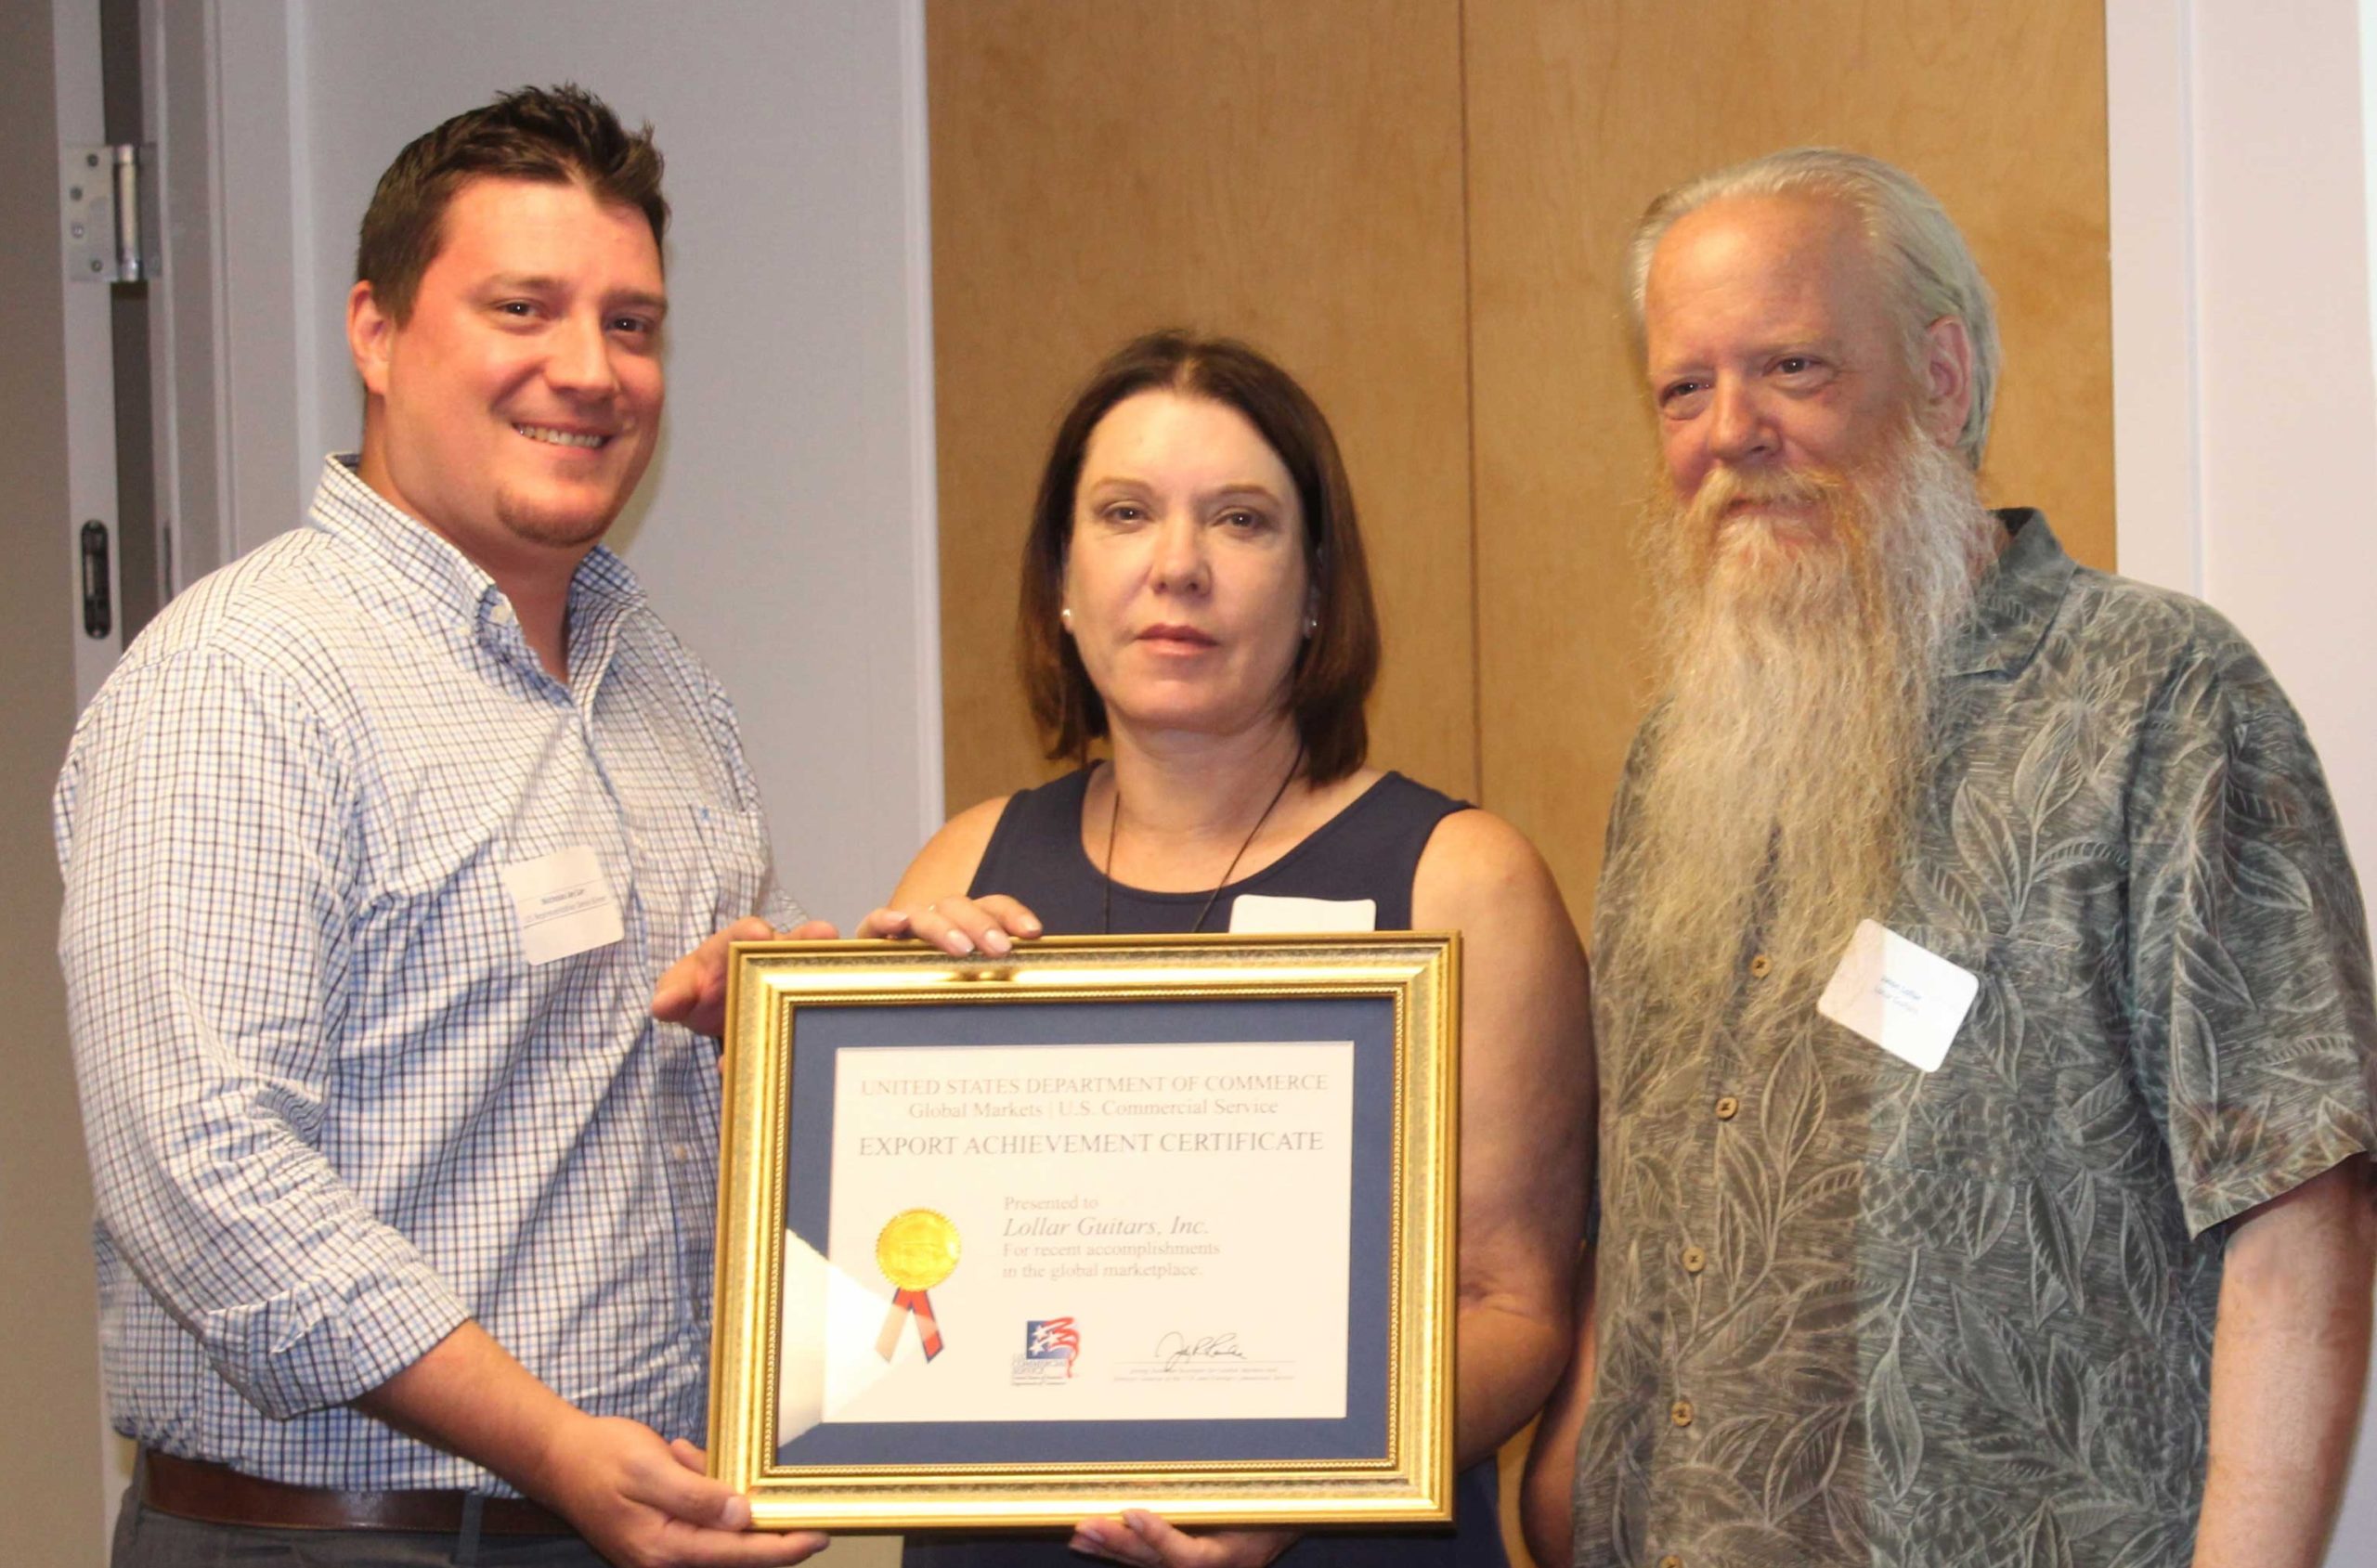 Rep. Kilmer’s District Representative Nicholas Carr (left) presents a U.S. Commercial Service Export Achievement Certificate to Stephanie and Jason Lollar of Lollar Guitars Inc. (right).Image courtesy U.S. Commercial Service